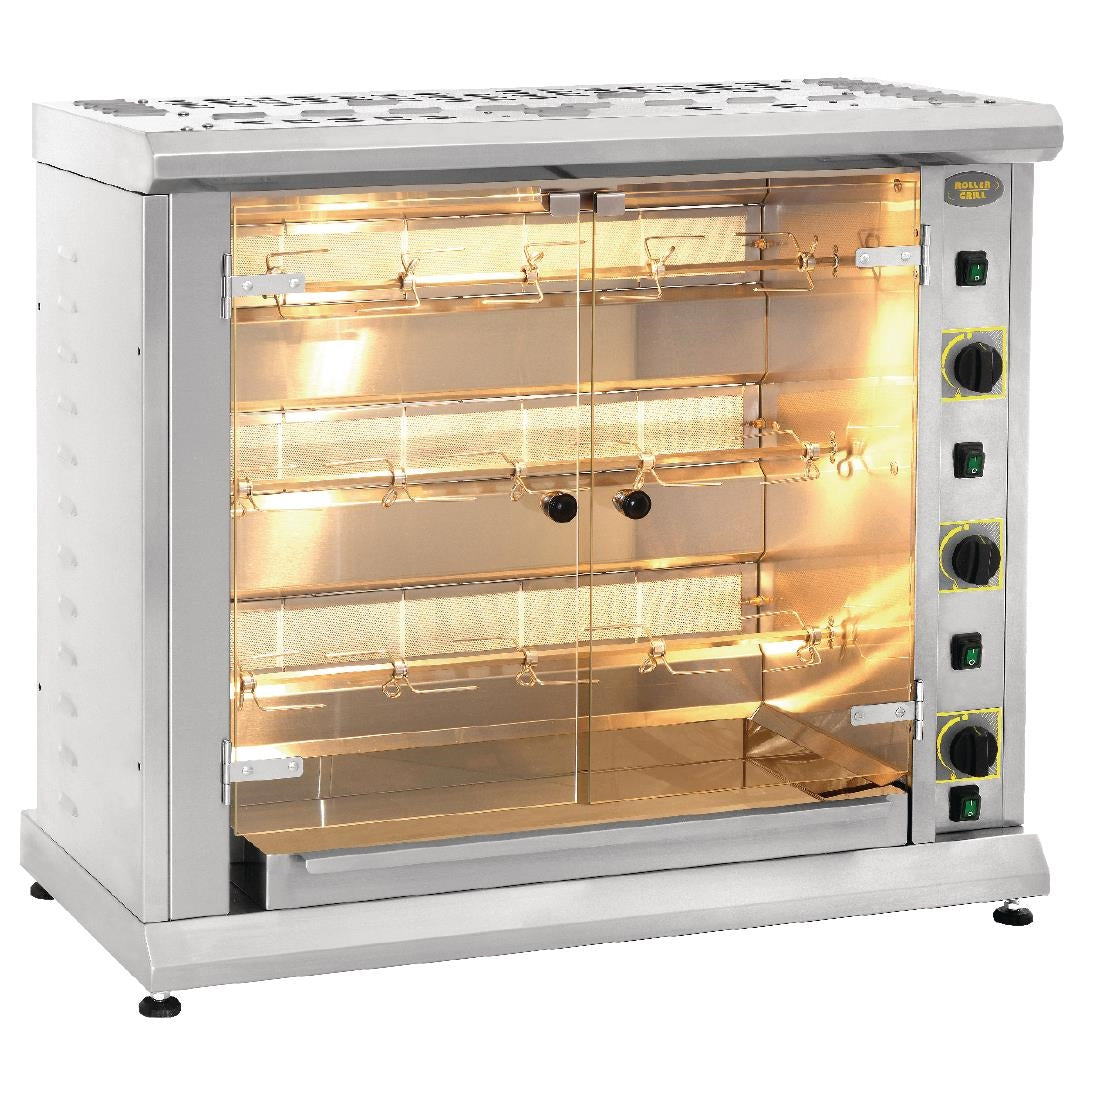 GD367 Roller Grill Electric Rotisserie RBE 120Q JD Catering Equipment Solutions Ltd